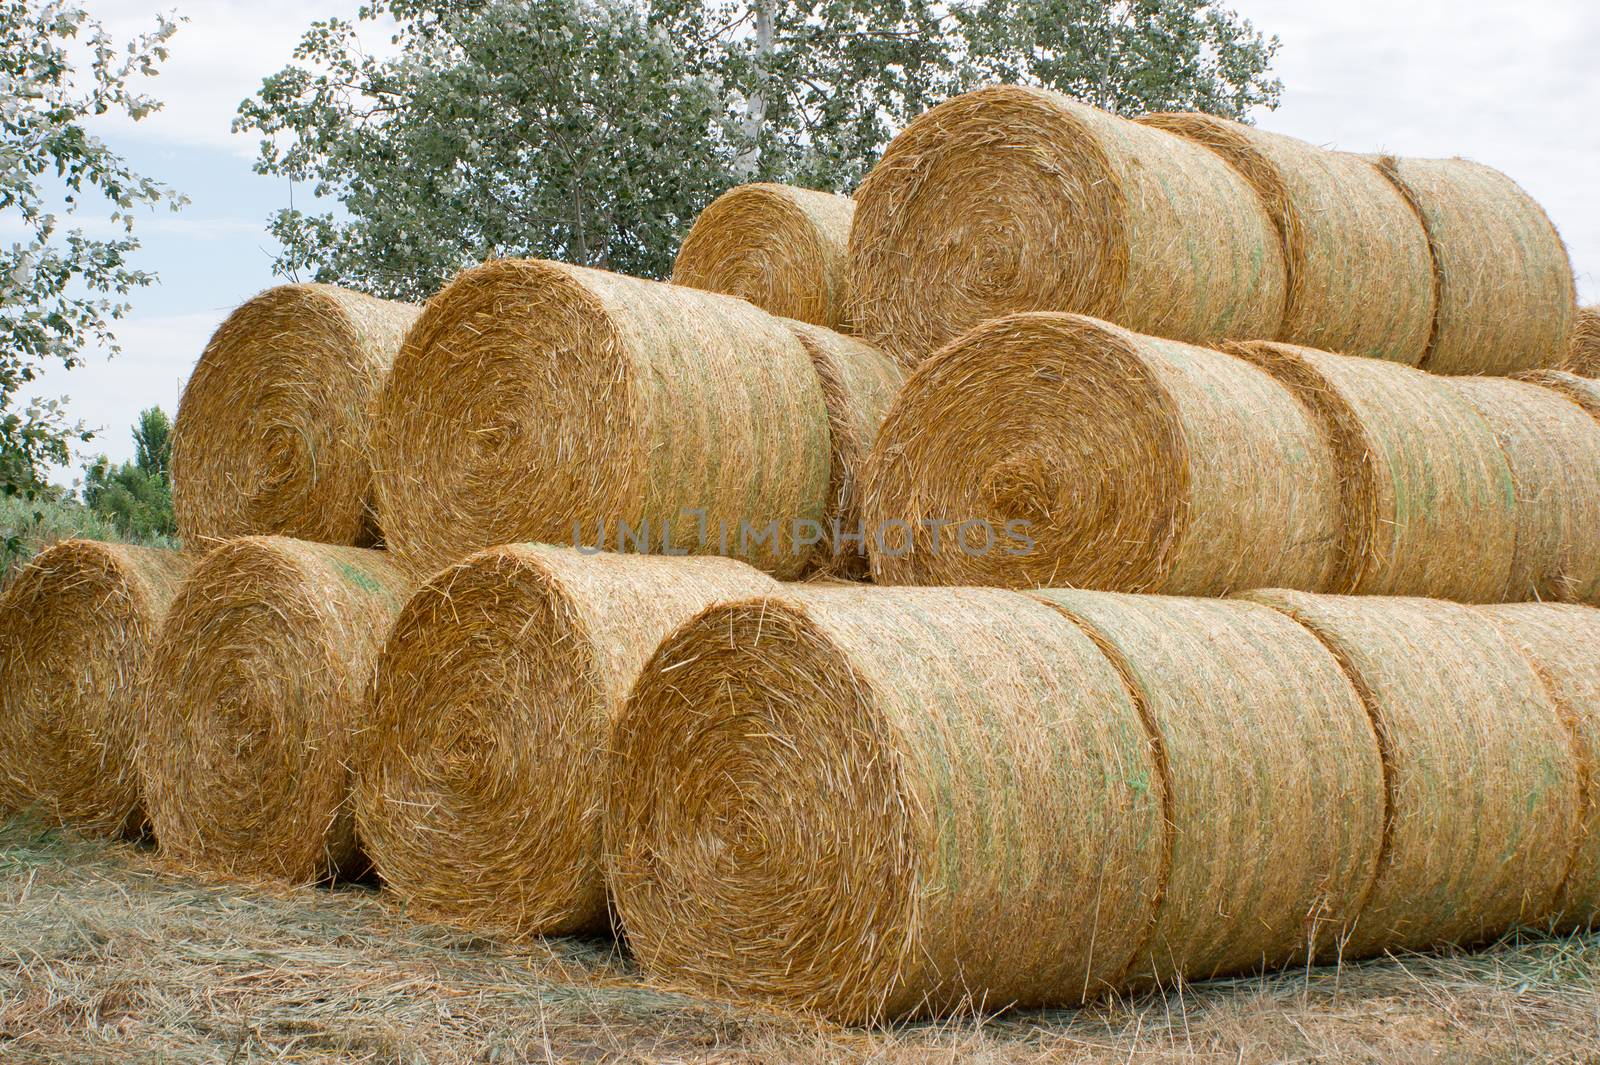 The round bales of straw stacked laid.